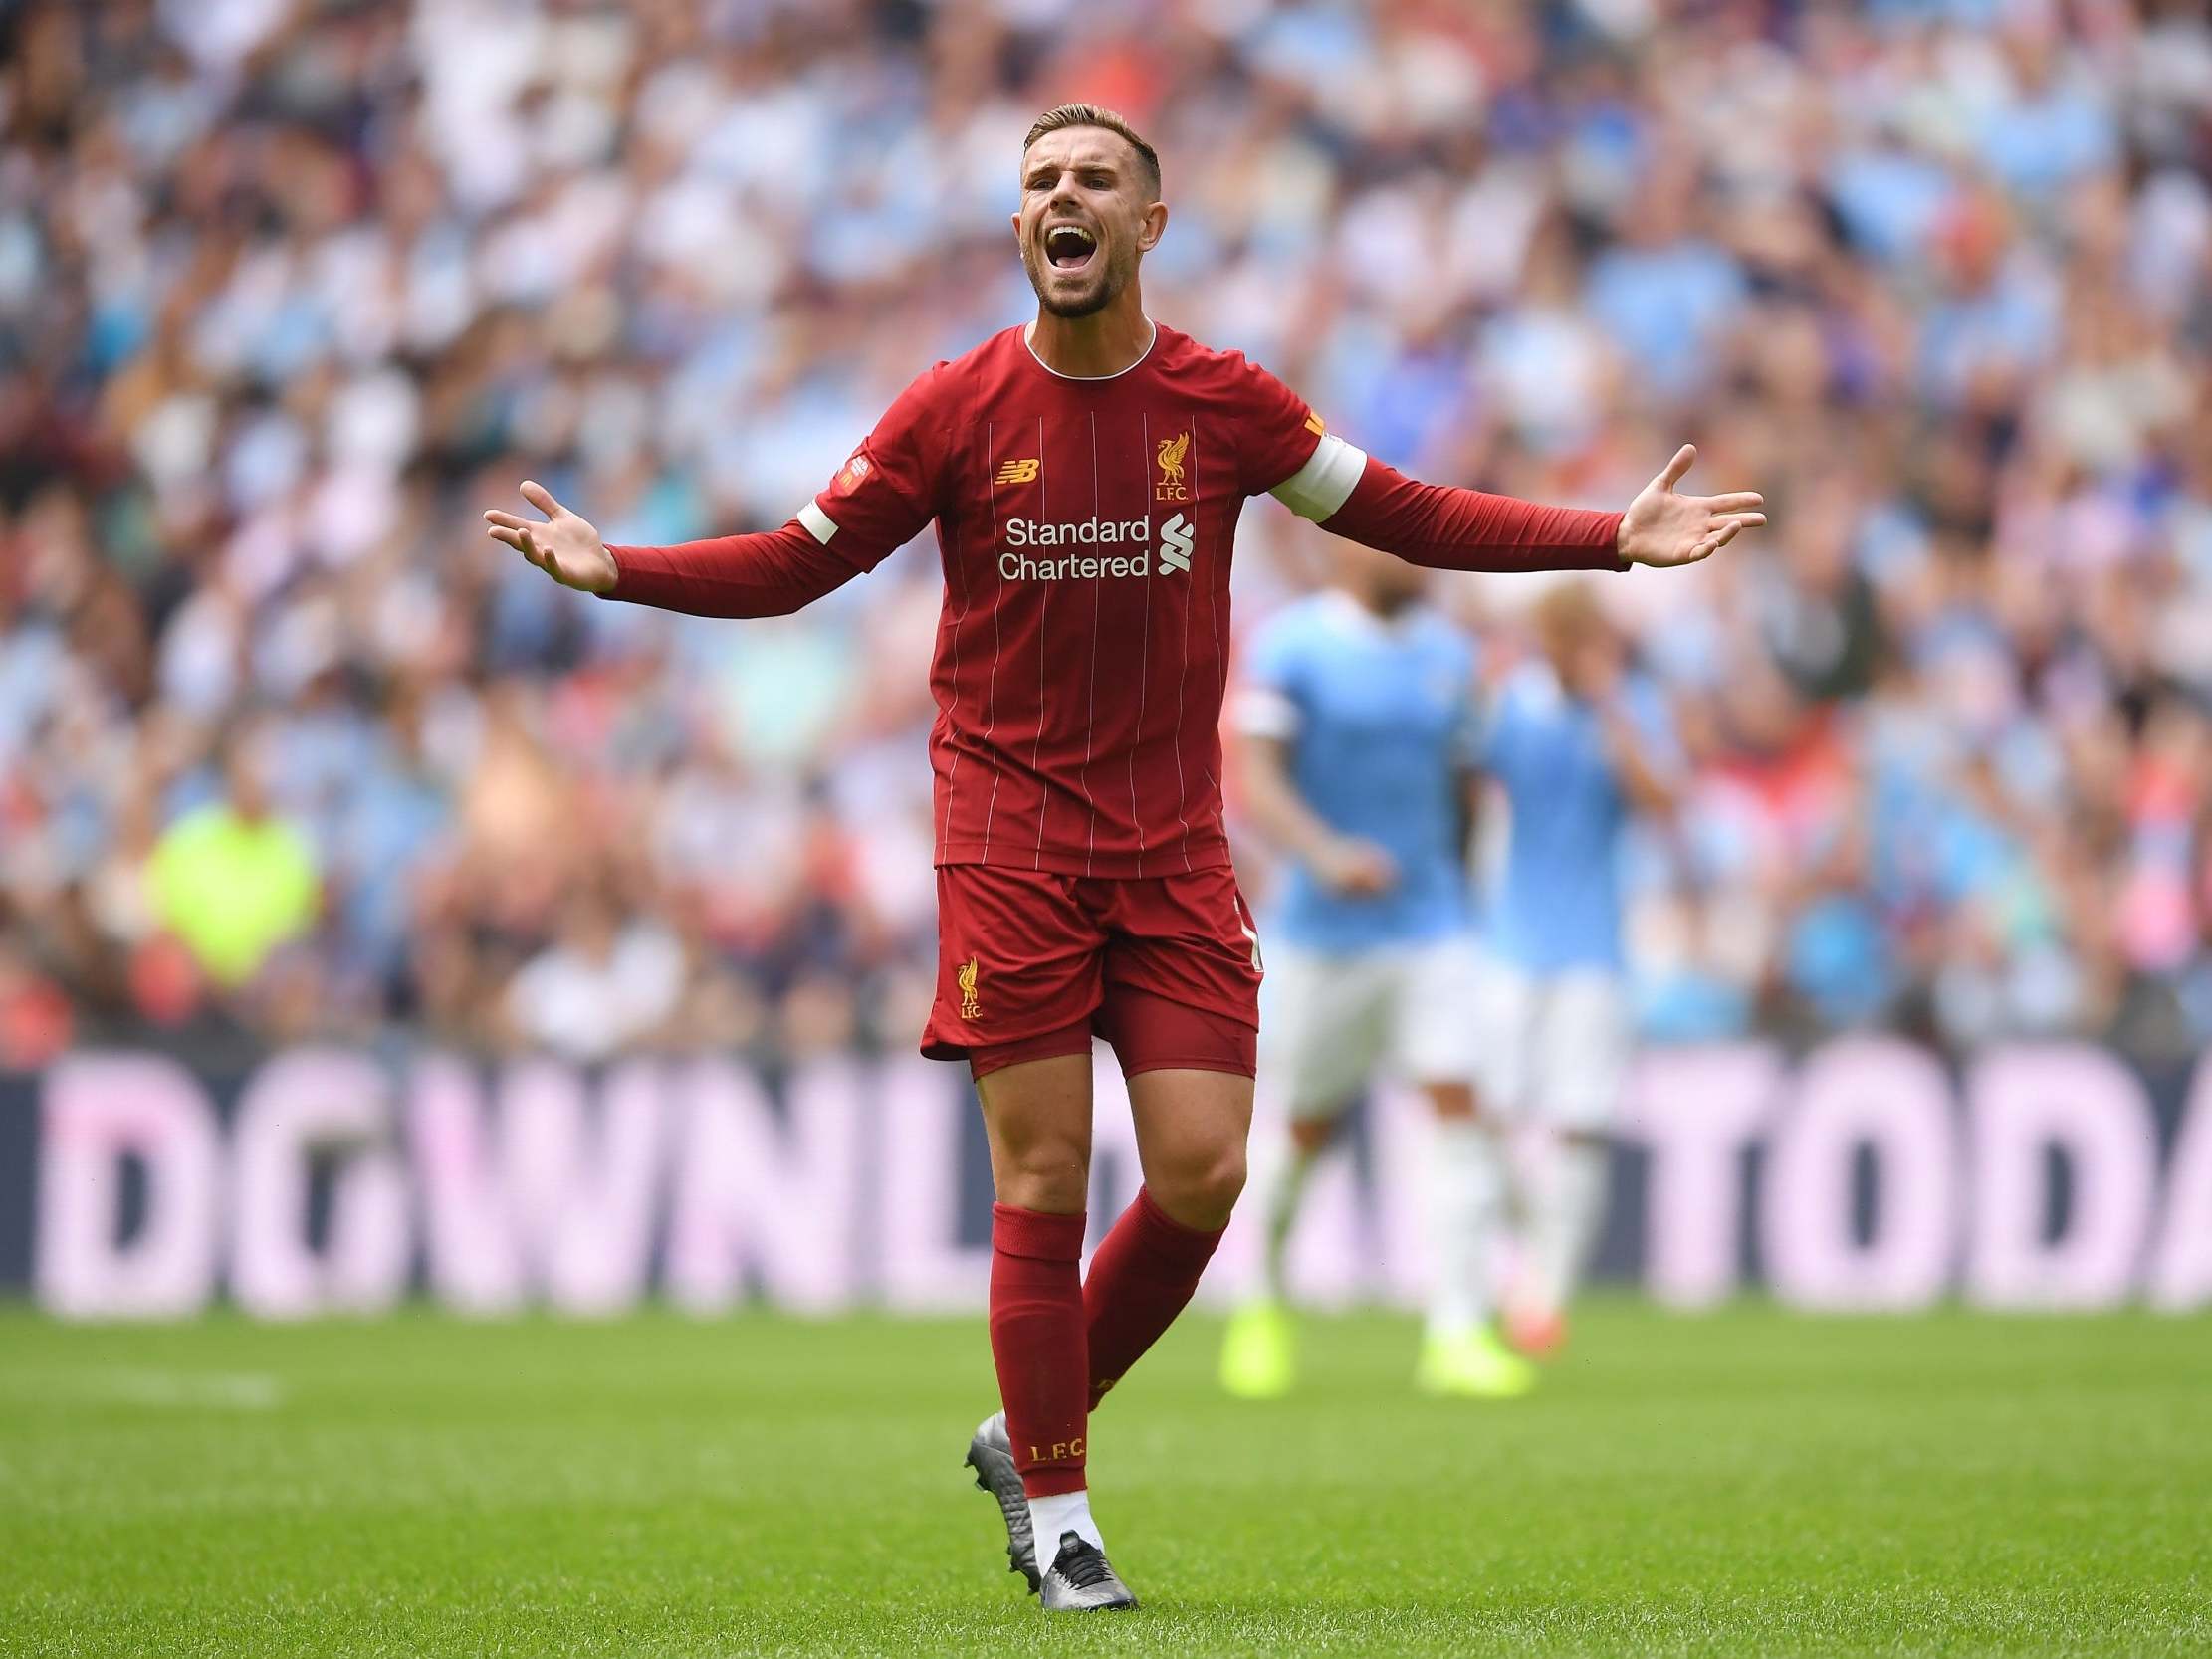 The Liverpool captain is looking at the positives in the defeat against Manchester City